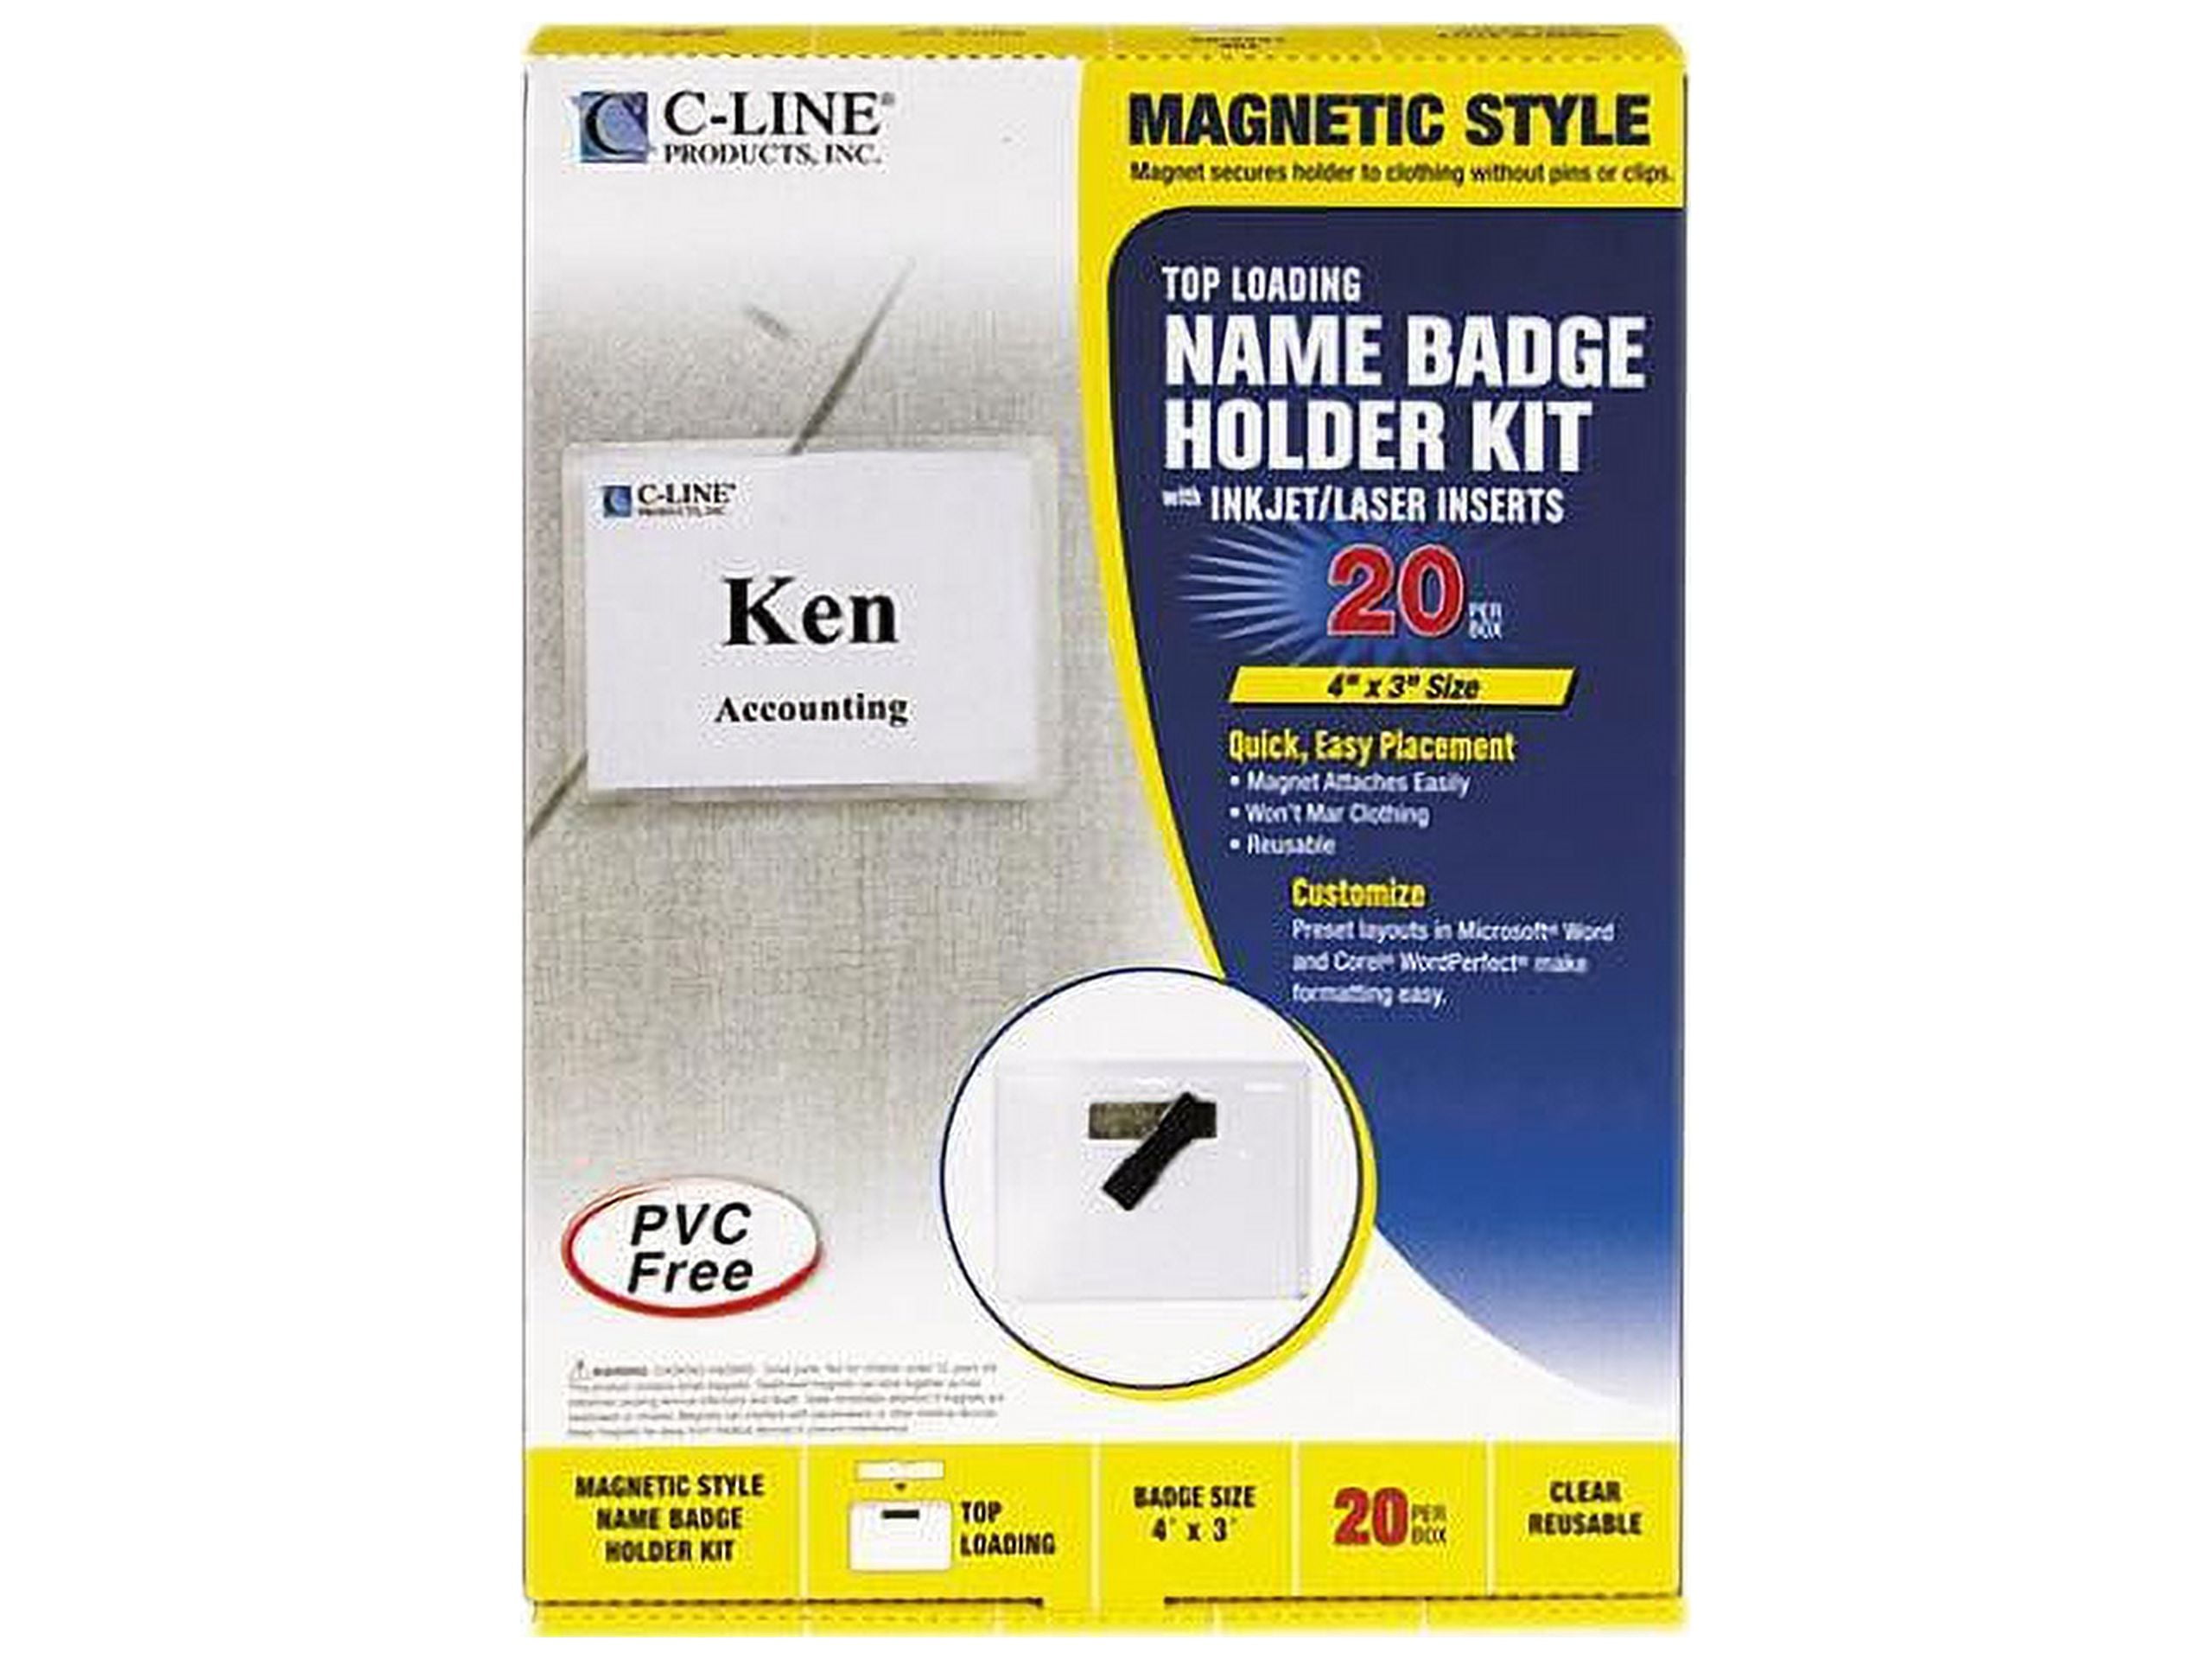 C-Line Magnetic Style Name Badge Holder Kit, Sealed Holders with Inserts,  4 x 3, Box of 20